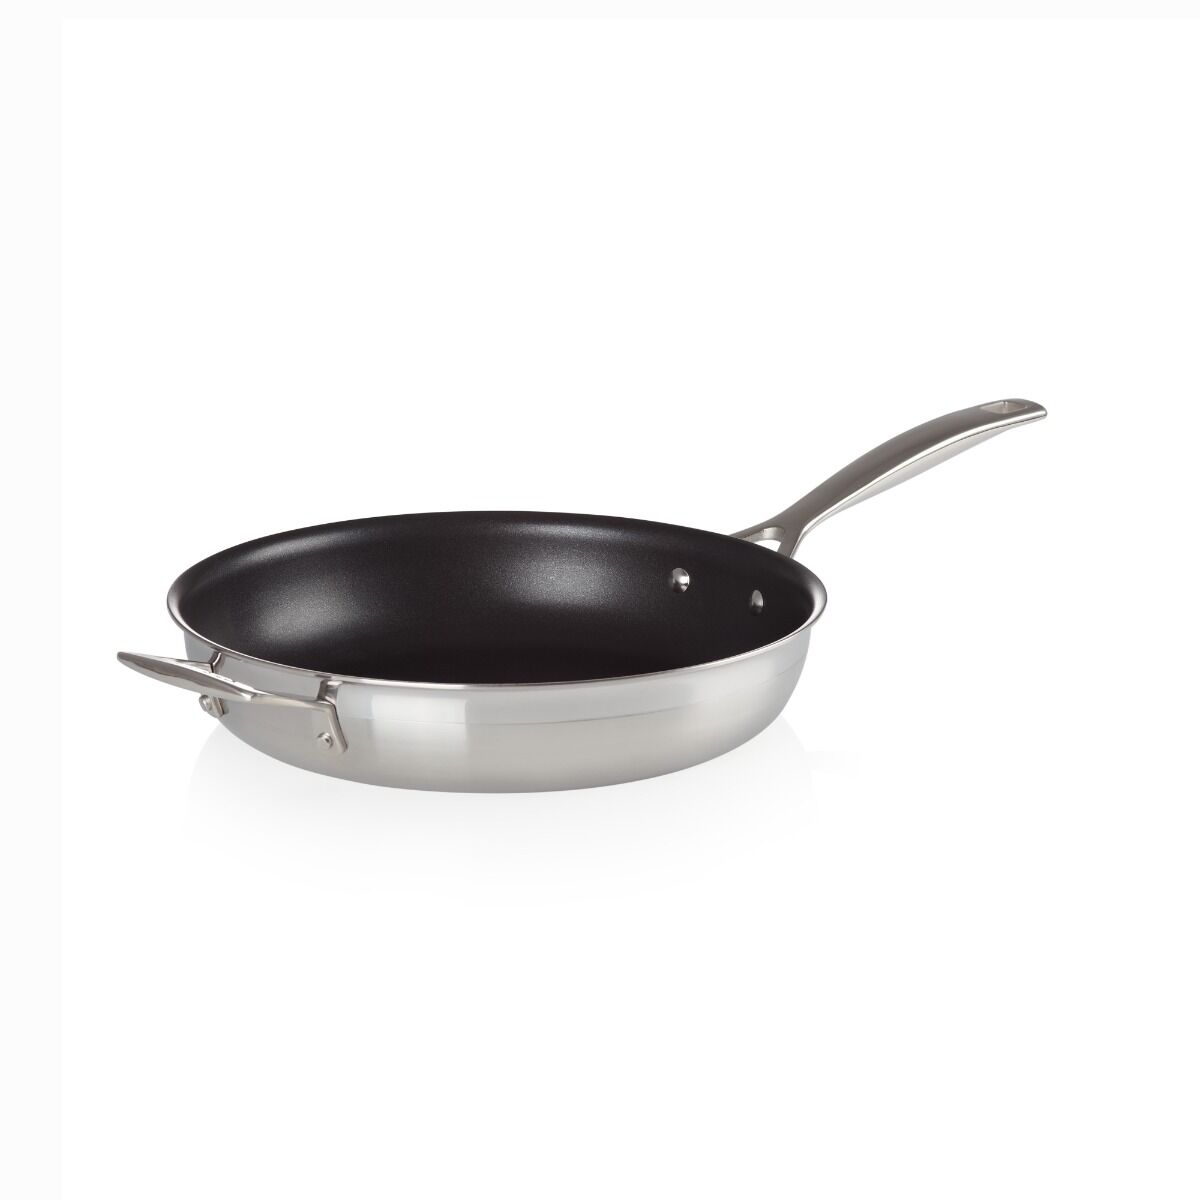 Le Creuset 962003281 3Ply 28cm Non-Stick Frying Pan with Helper Handle - Stainless Steel